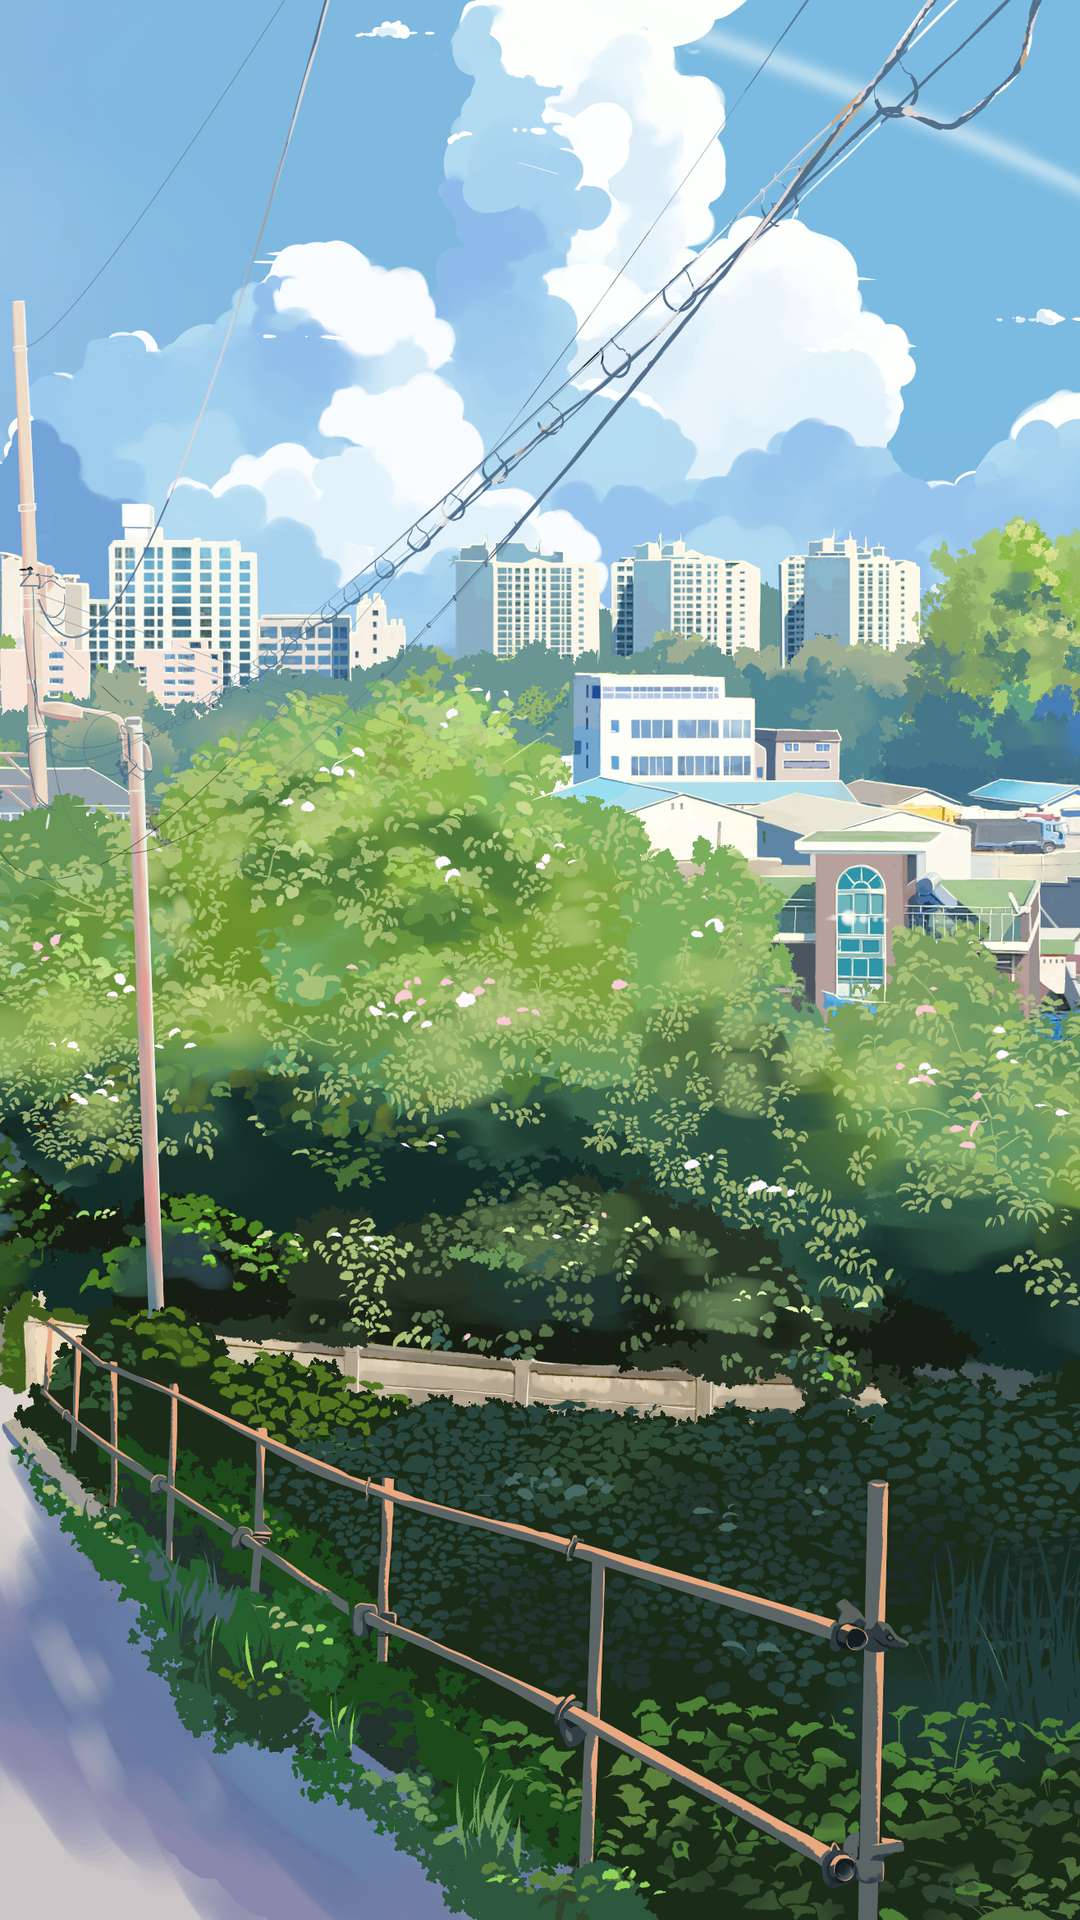 230+ Anime Landscape HD Wallpapers and Backgrounds